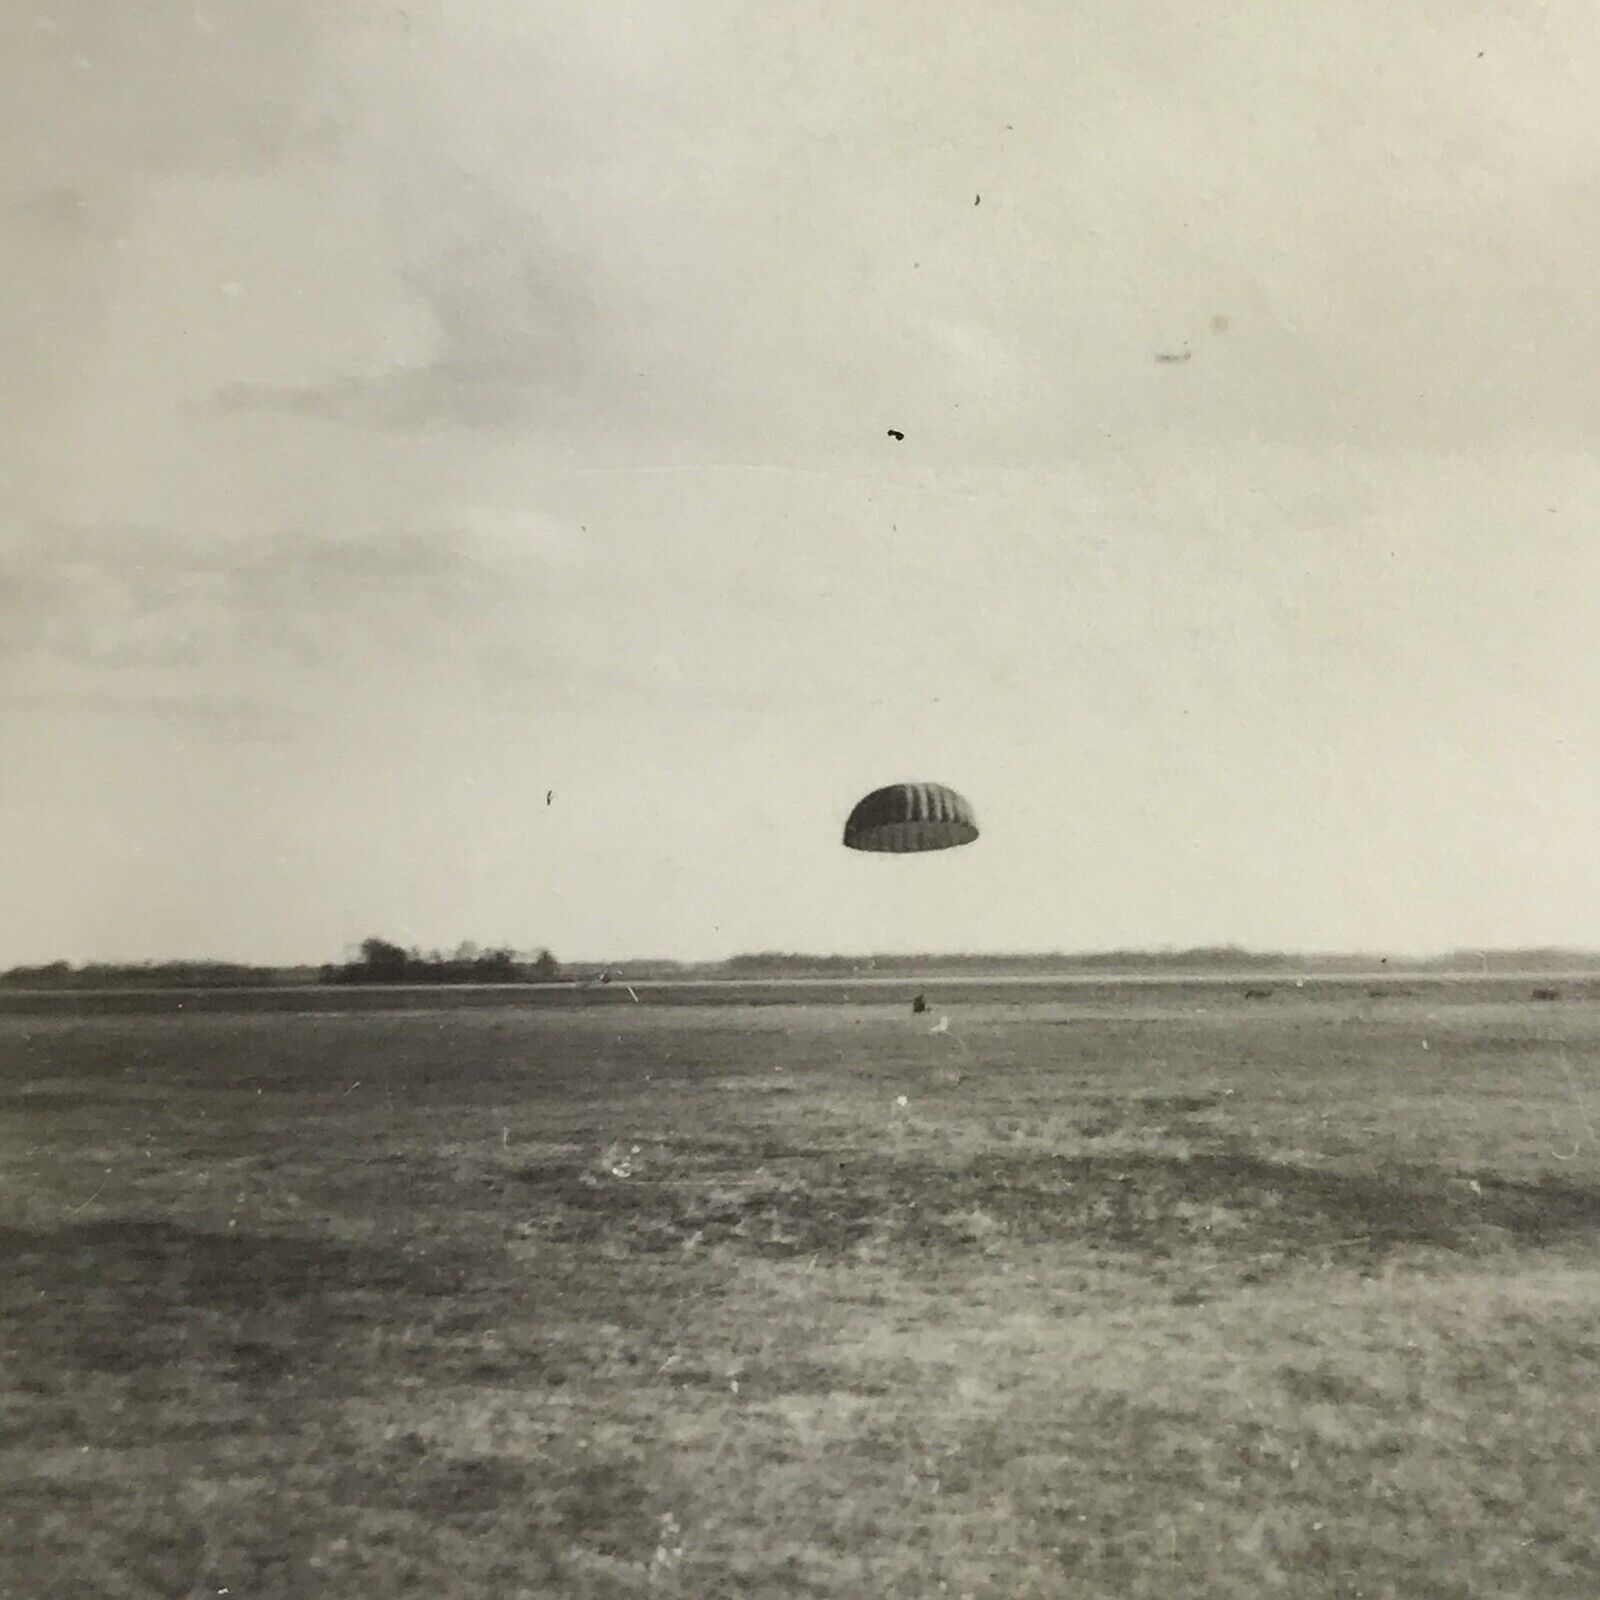 Vintage Black and White Photo Skydiver Landing On Ground Parachute Open Field 